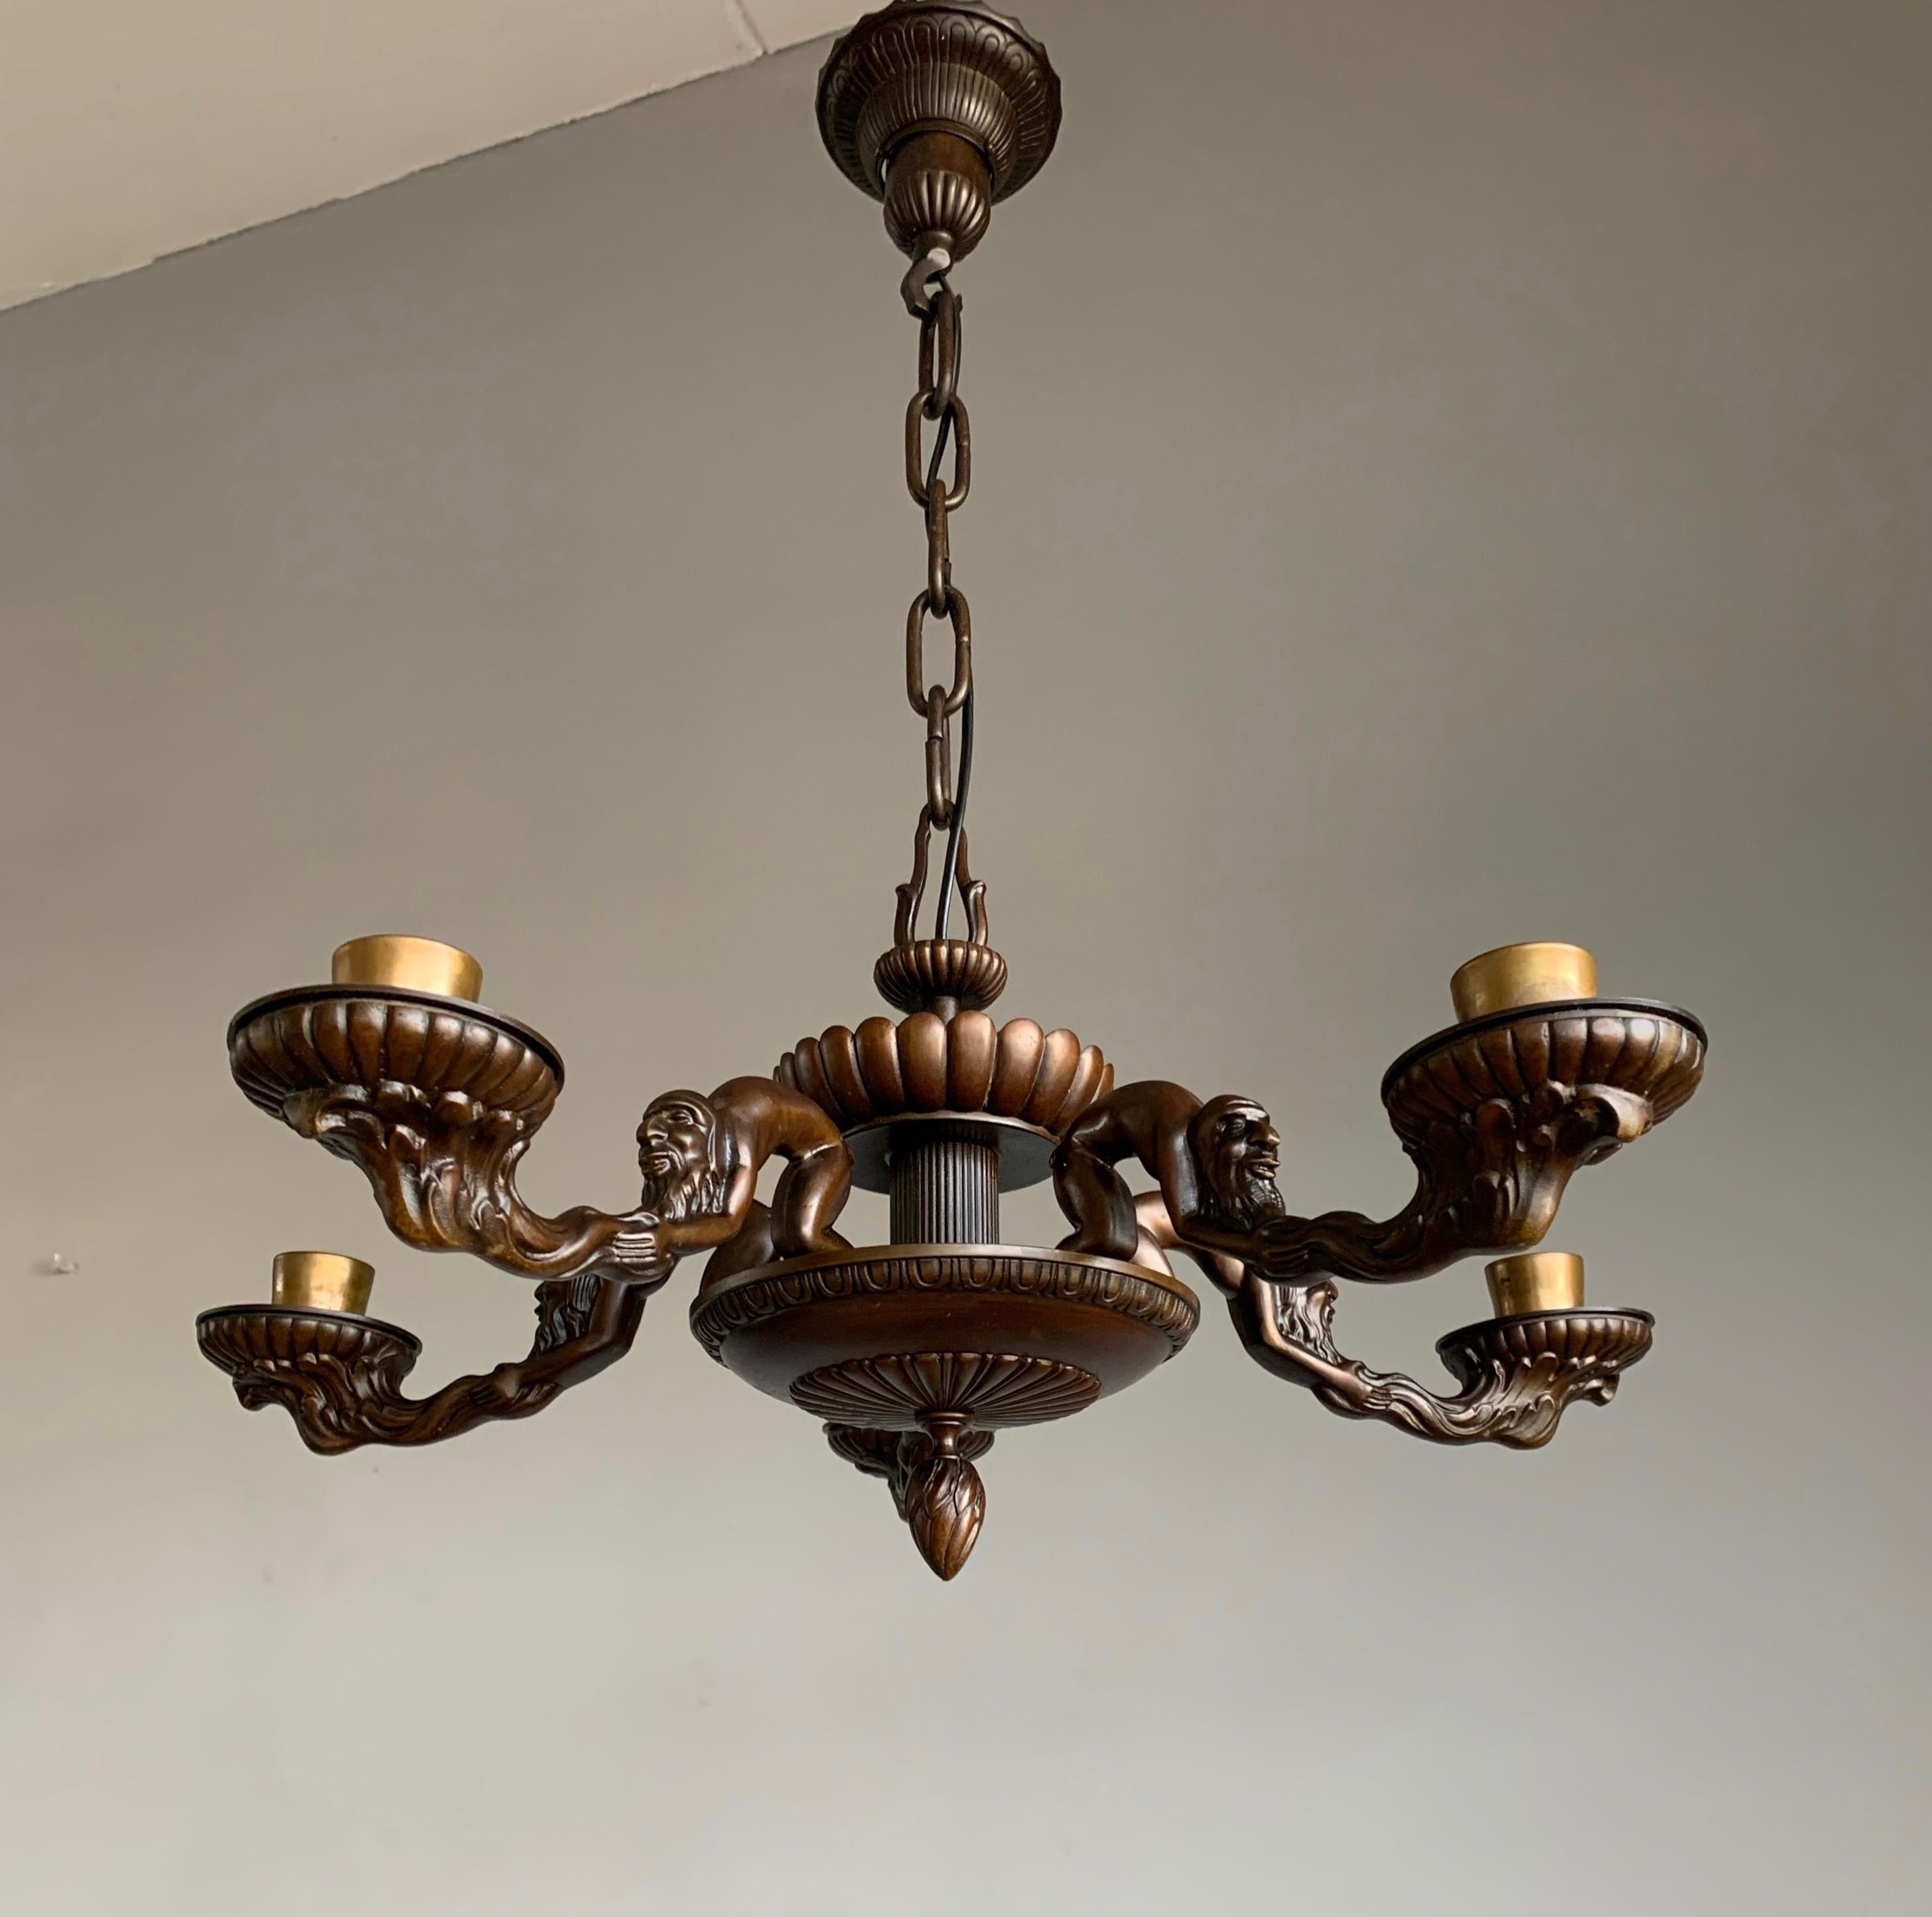 One of a kind antique chandelier with amazing arms and natural mineral stone shades.

With early 20th century lighting as one of our specialities we were amazed when we found this unique light fixture. We were amazed by the quality and beauty and to